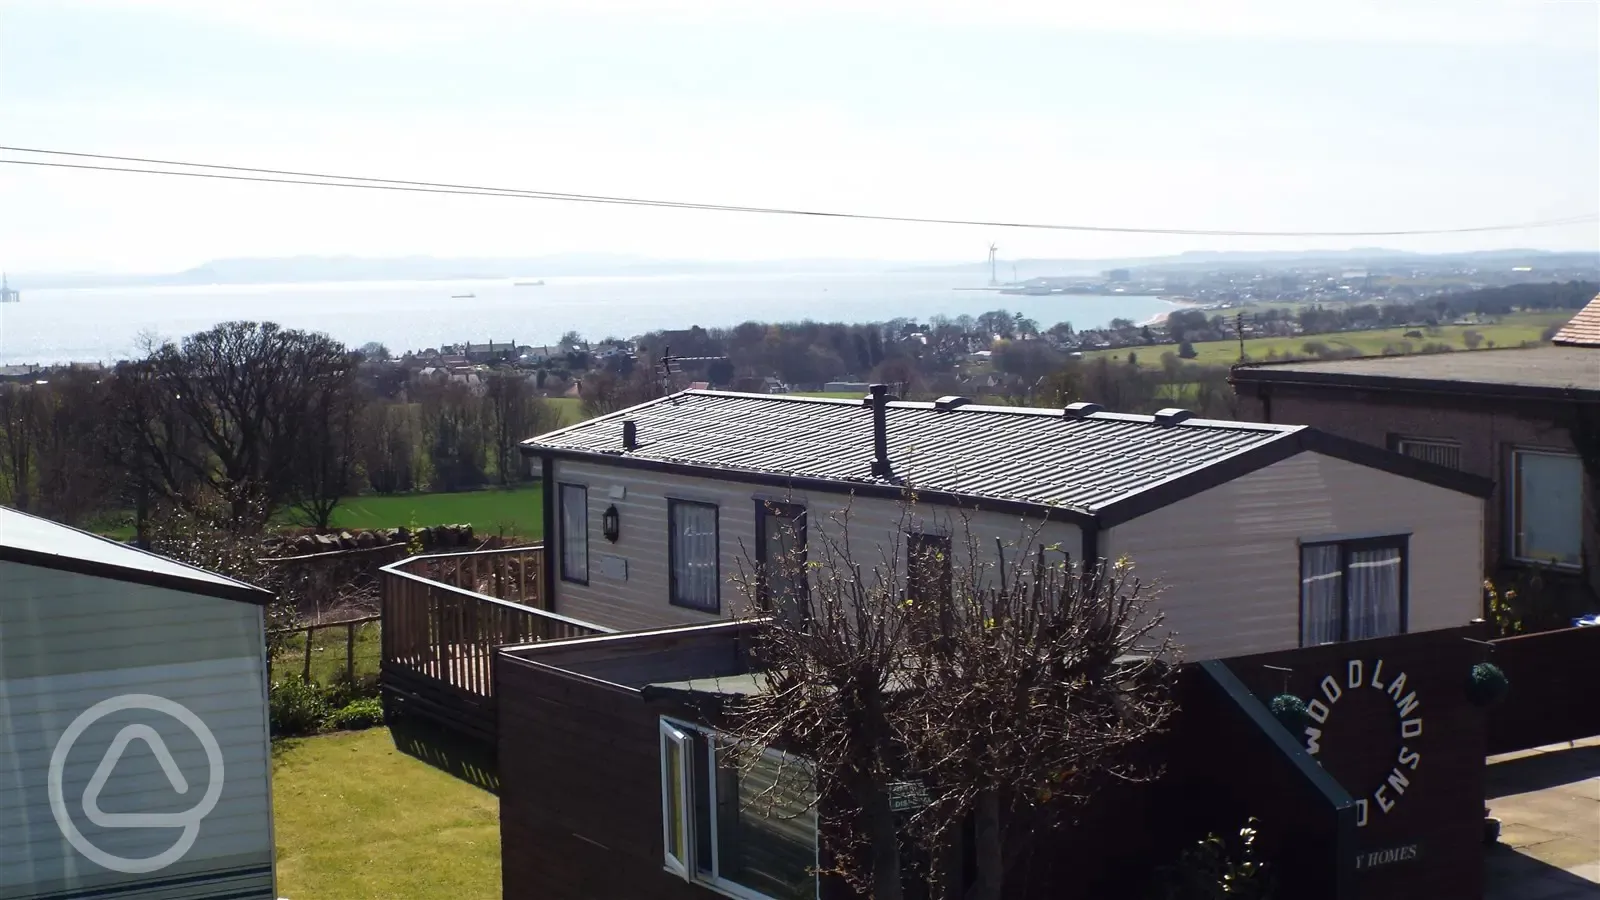 Holiday Homes with panoramic views across the Forth to Edinburgh